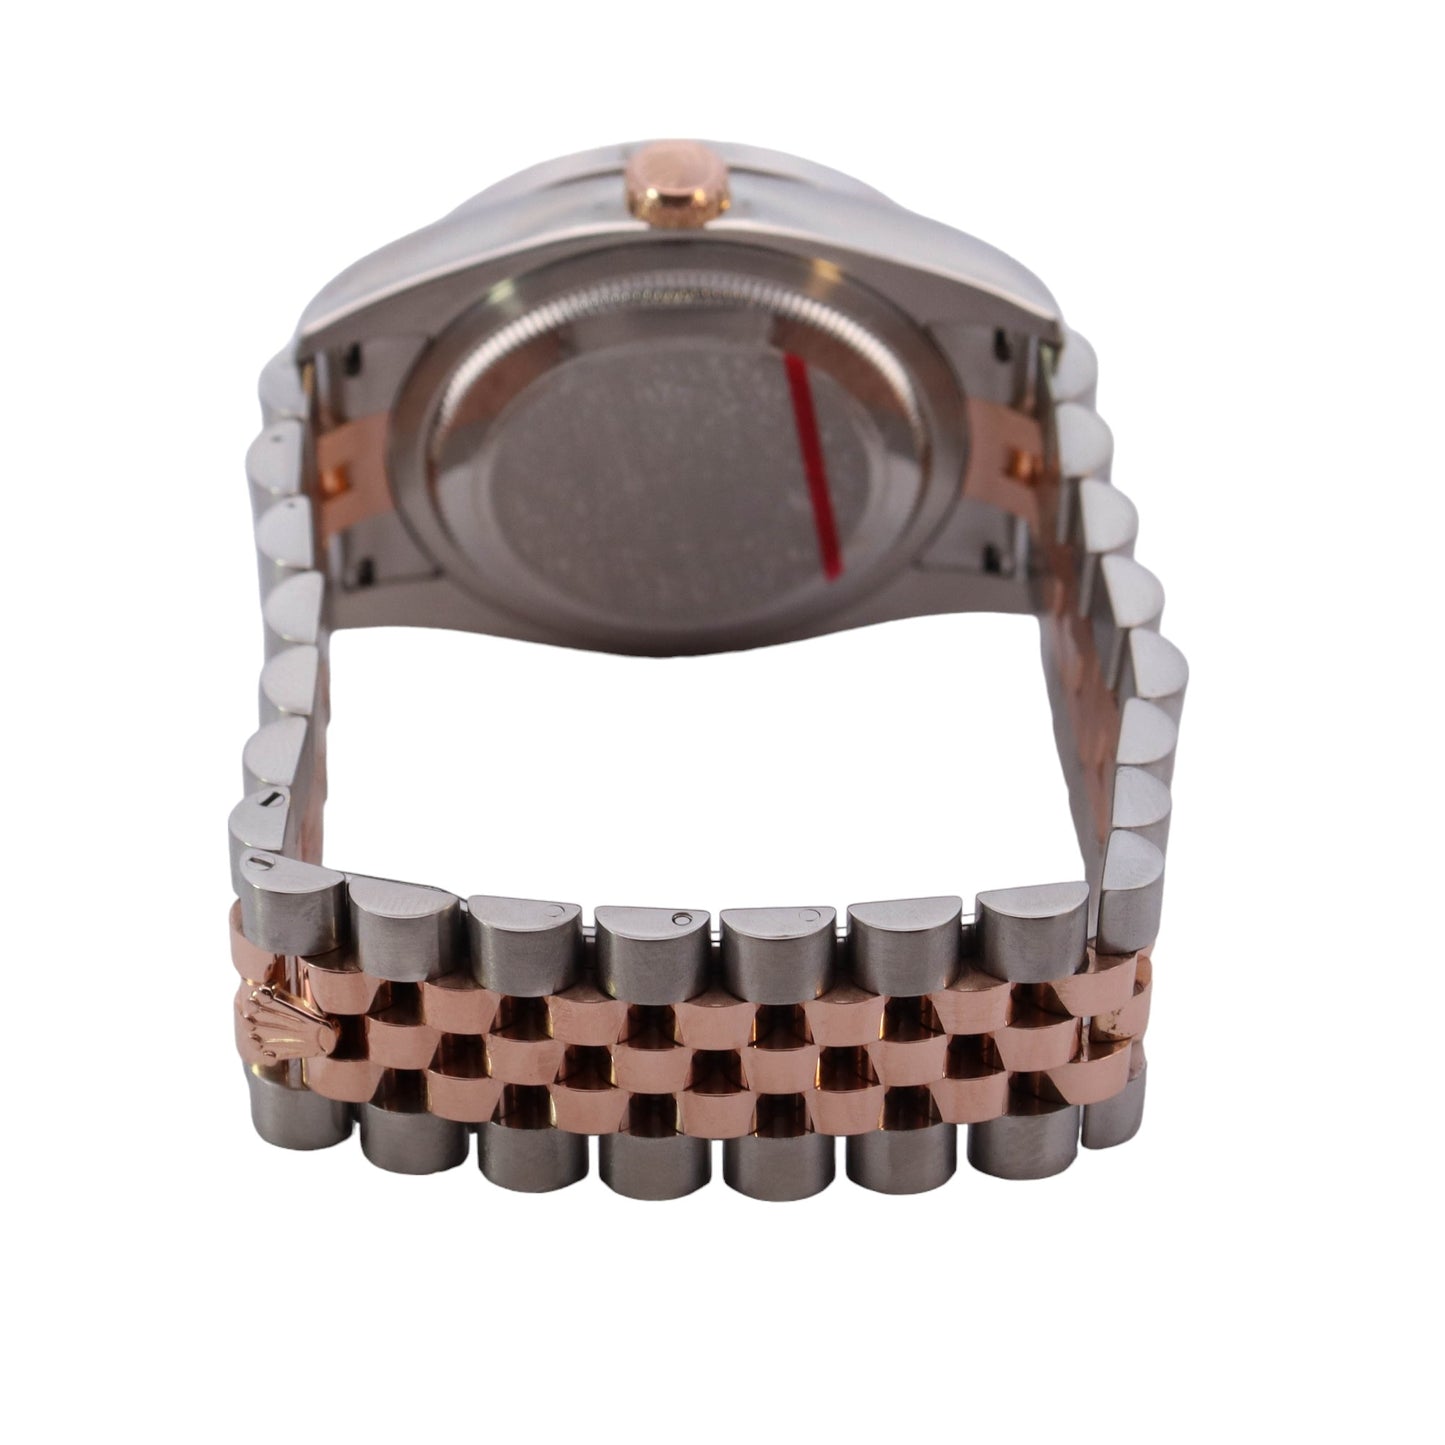 Rolex Datejust Two Tone Rose Gold & Stainless Steel 36mm Dark MOP Diamond Dial Watch Reference #: 116231